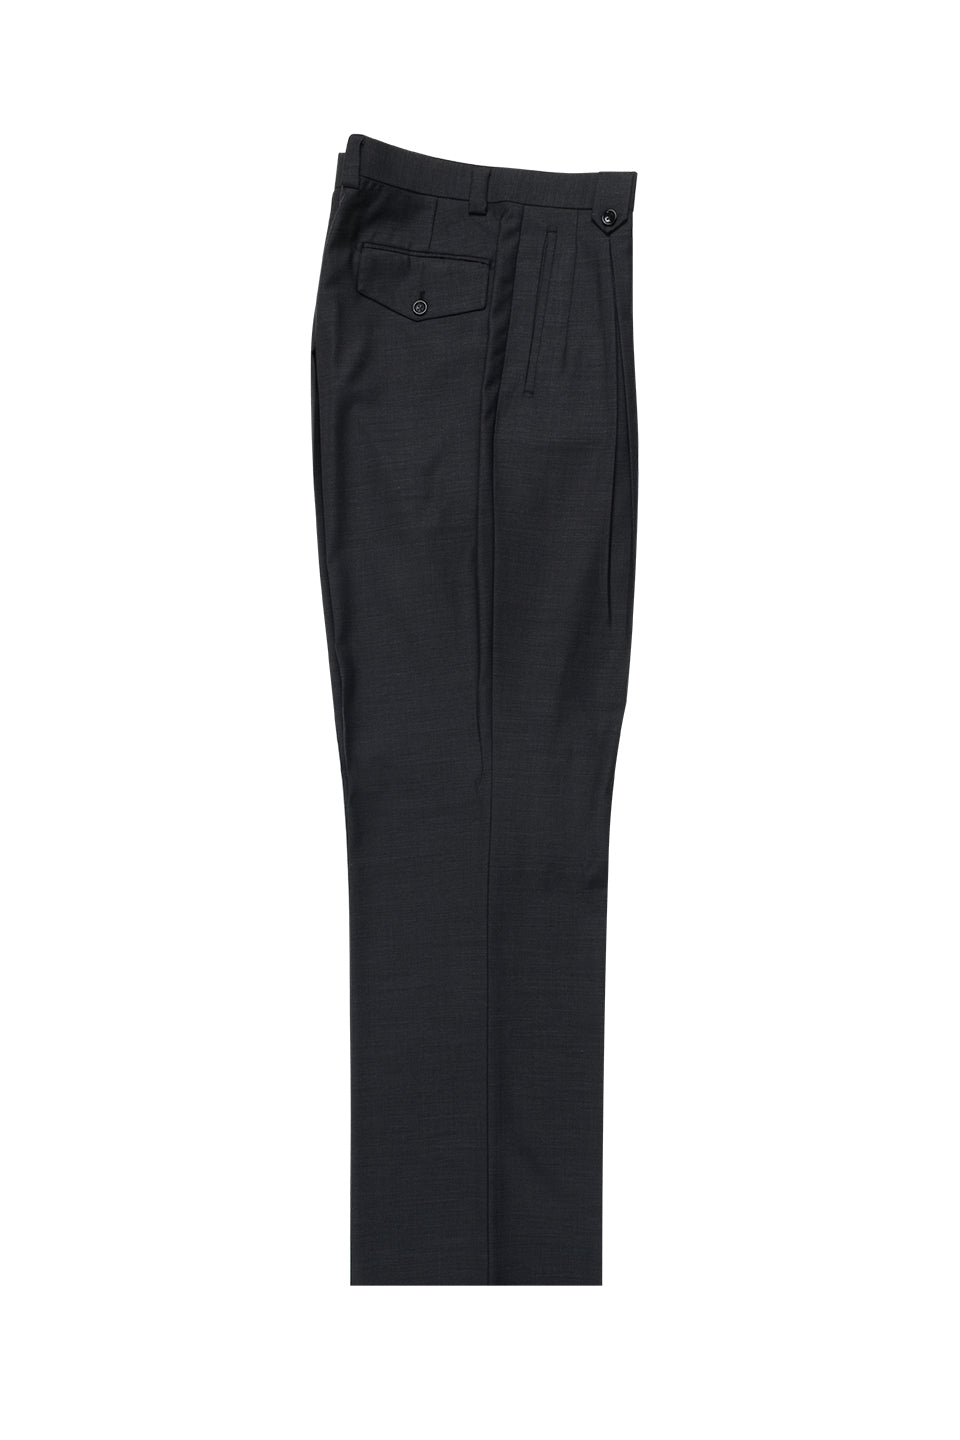 Charcoal Gray Wide Leg Wool Dress Pant 2586/2576 by Tiglio Luxe TIG101 ...